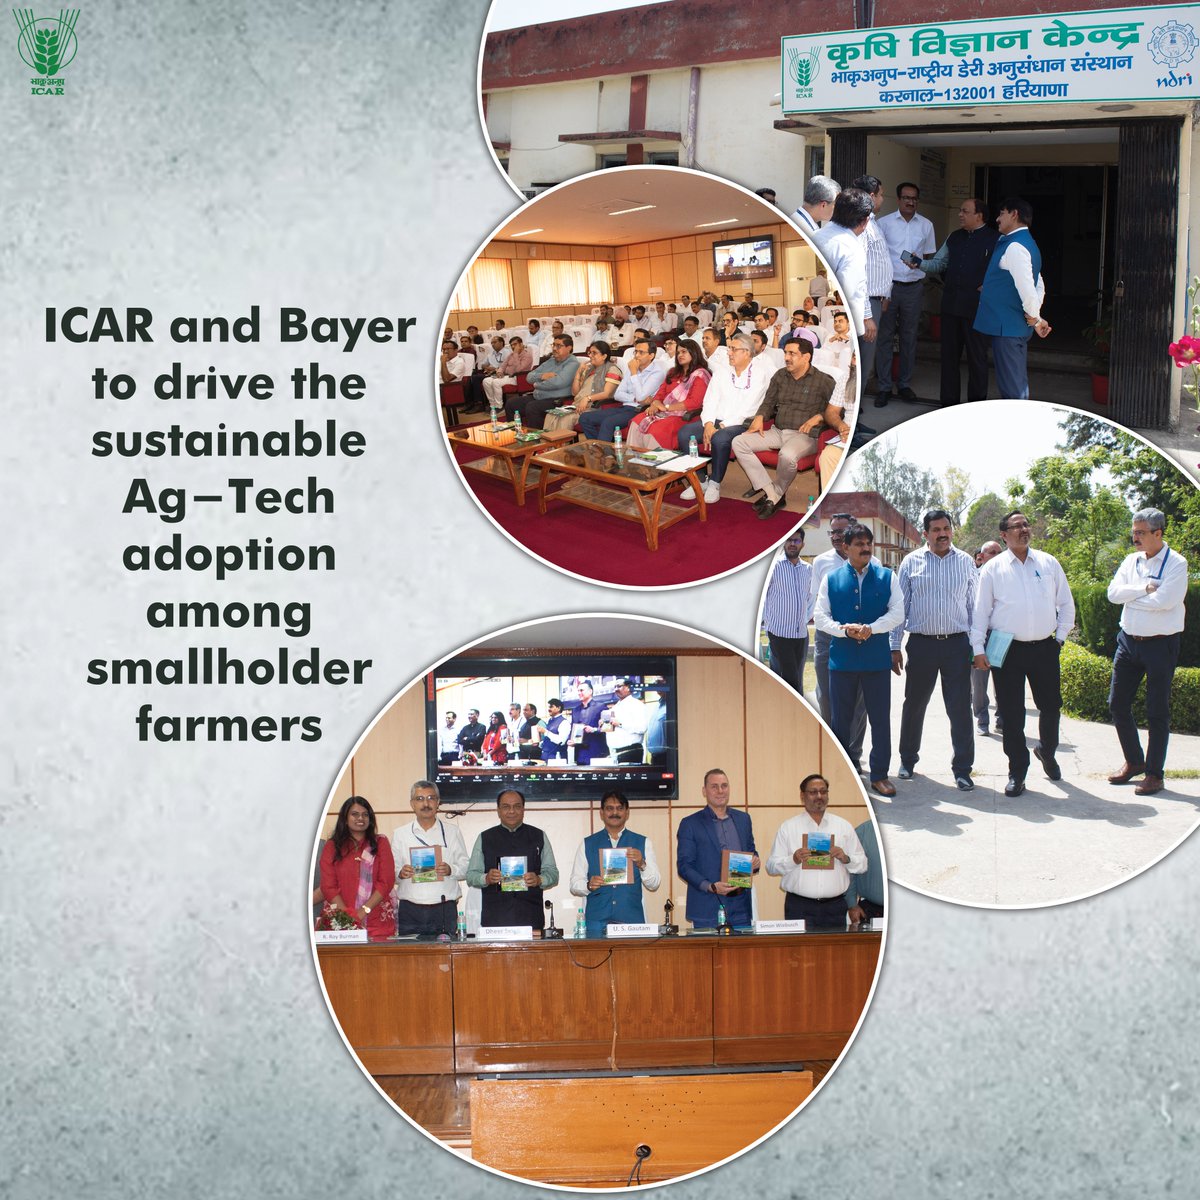 #ICAR and #Bayer to drive sustainable Ag-Tech adoption among smallholder #farmers. #Agriculture #farming @PMOIndia @mygovindia @PIB_India @AgriGoI @DDKisanChannel @Dept_of_AHD Read more: icar.org.in/node/20835